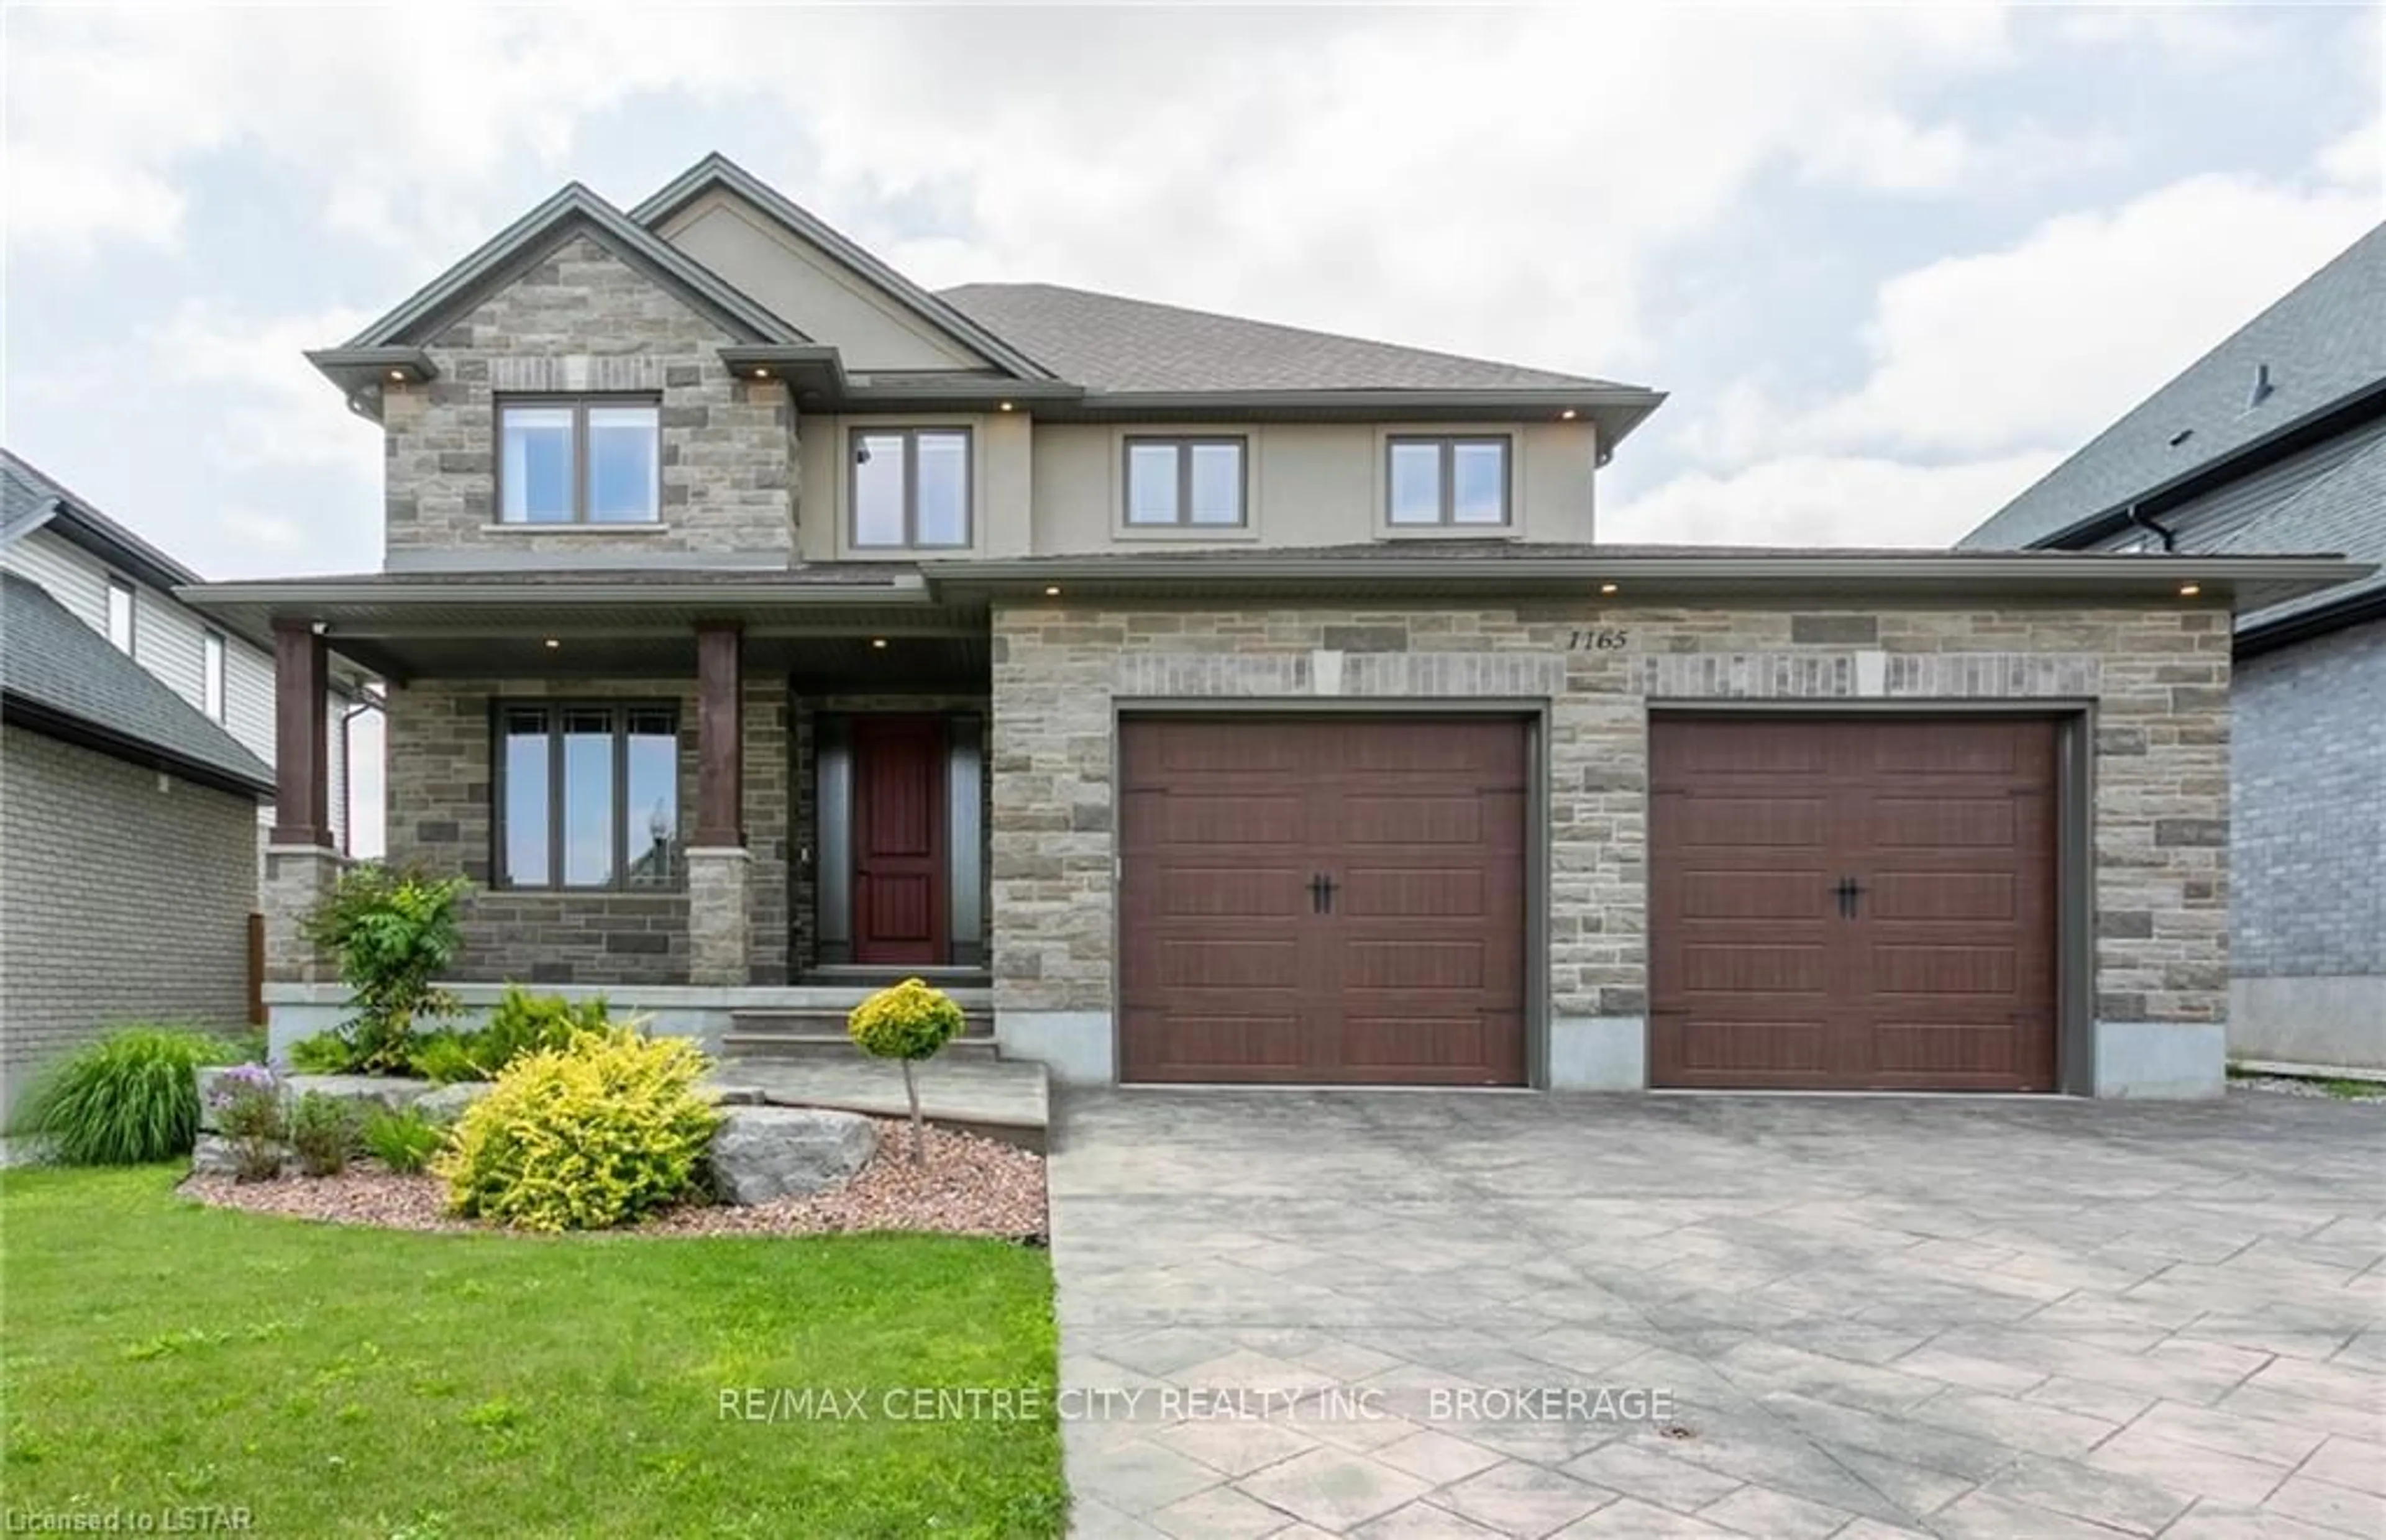 Home with brick exterior material for 1165 Cranbrook Rd, London Ontario N6K 0G7